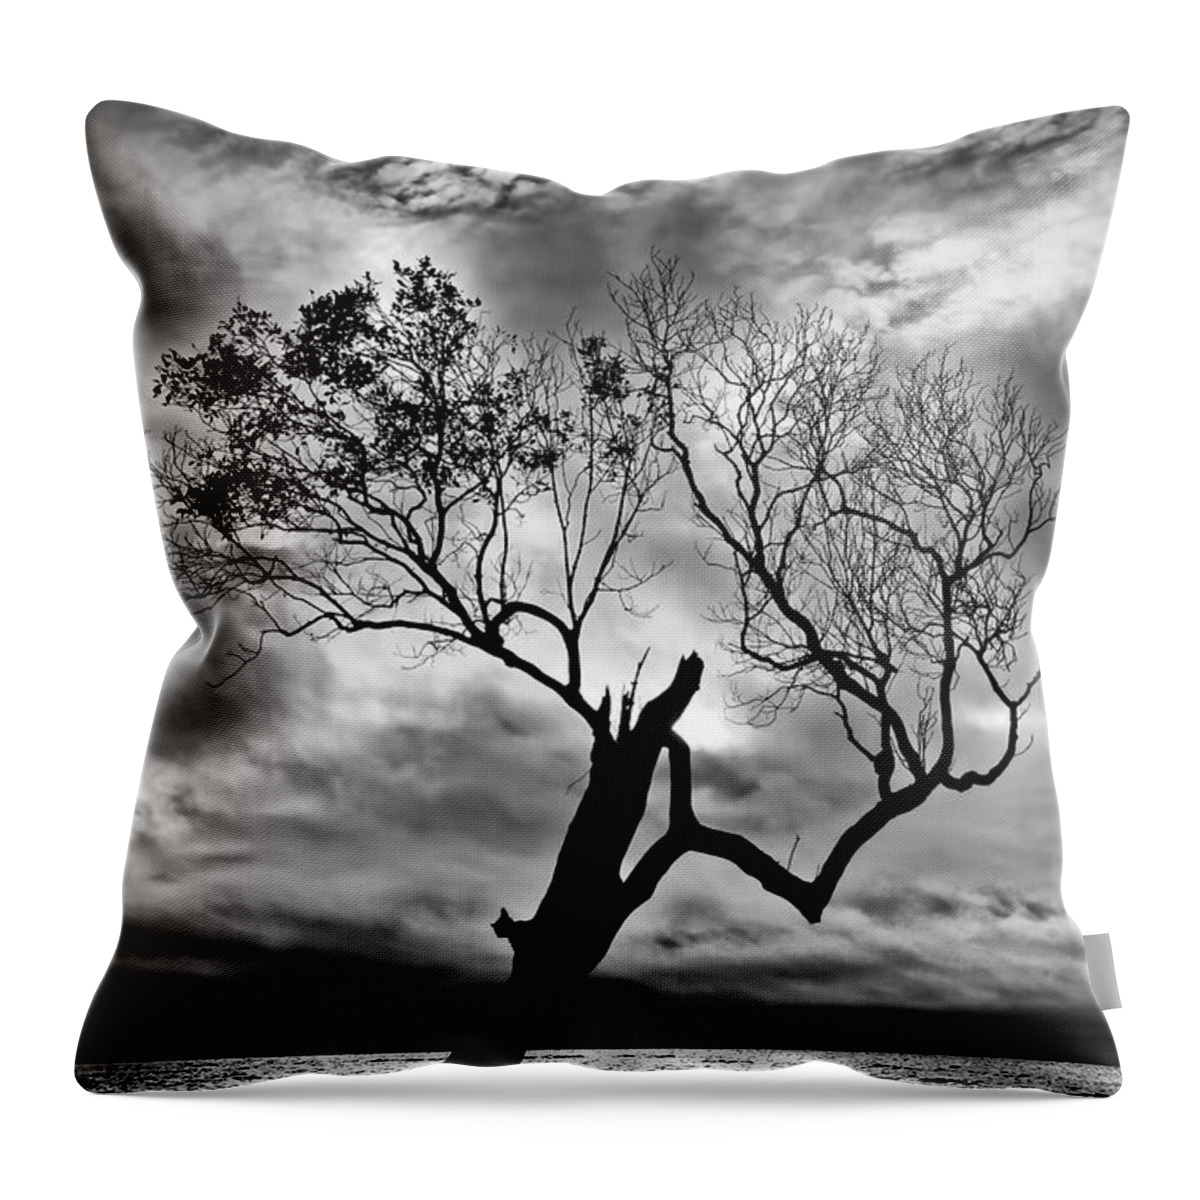 2015 Throw Pillow featuring the photograph The Old Mangrove tree in the Sea by Robert Charity